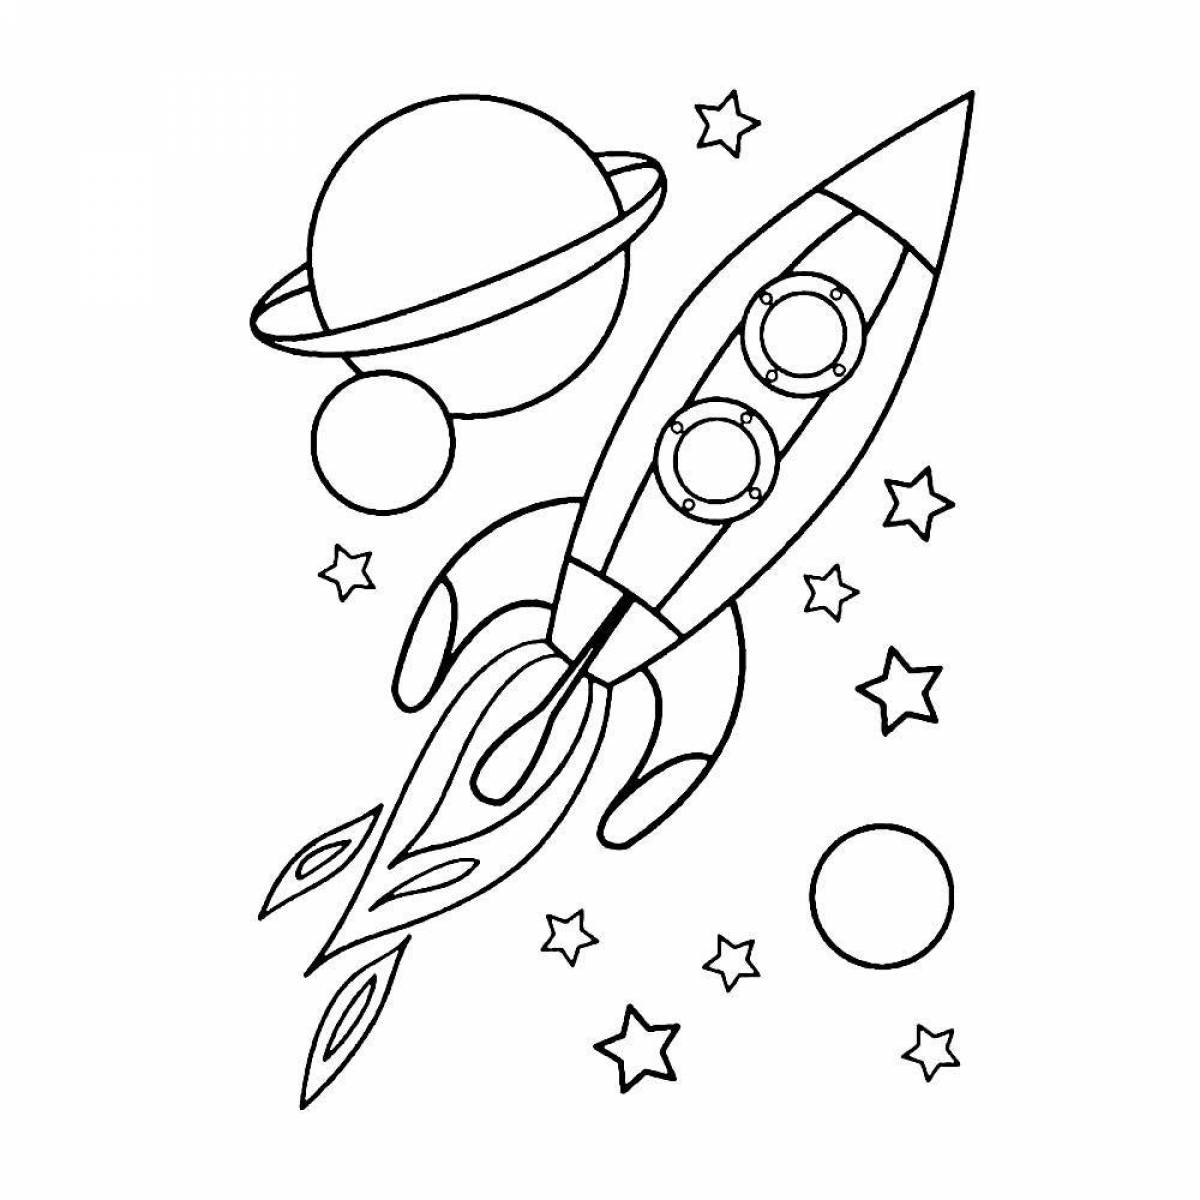 Fantastic space coloring book for 6-7 year olds